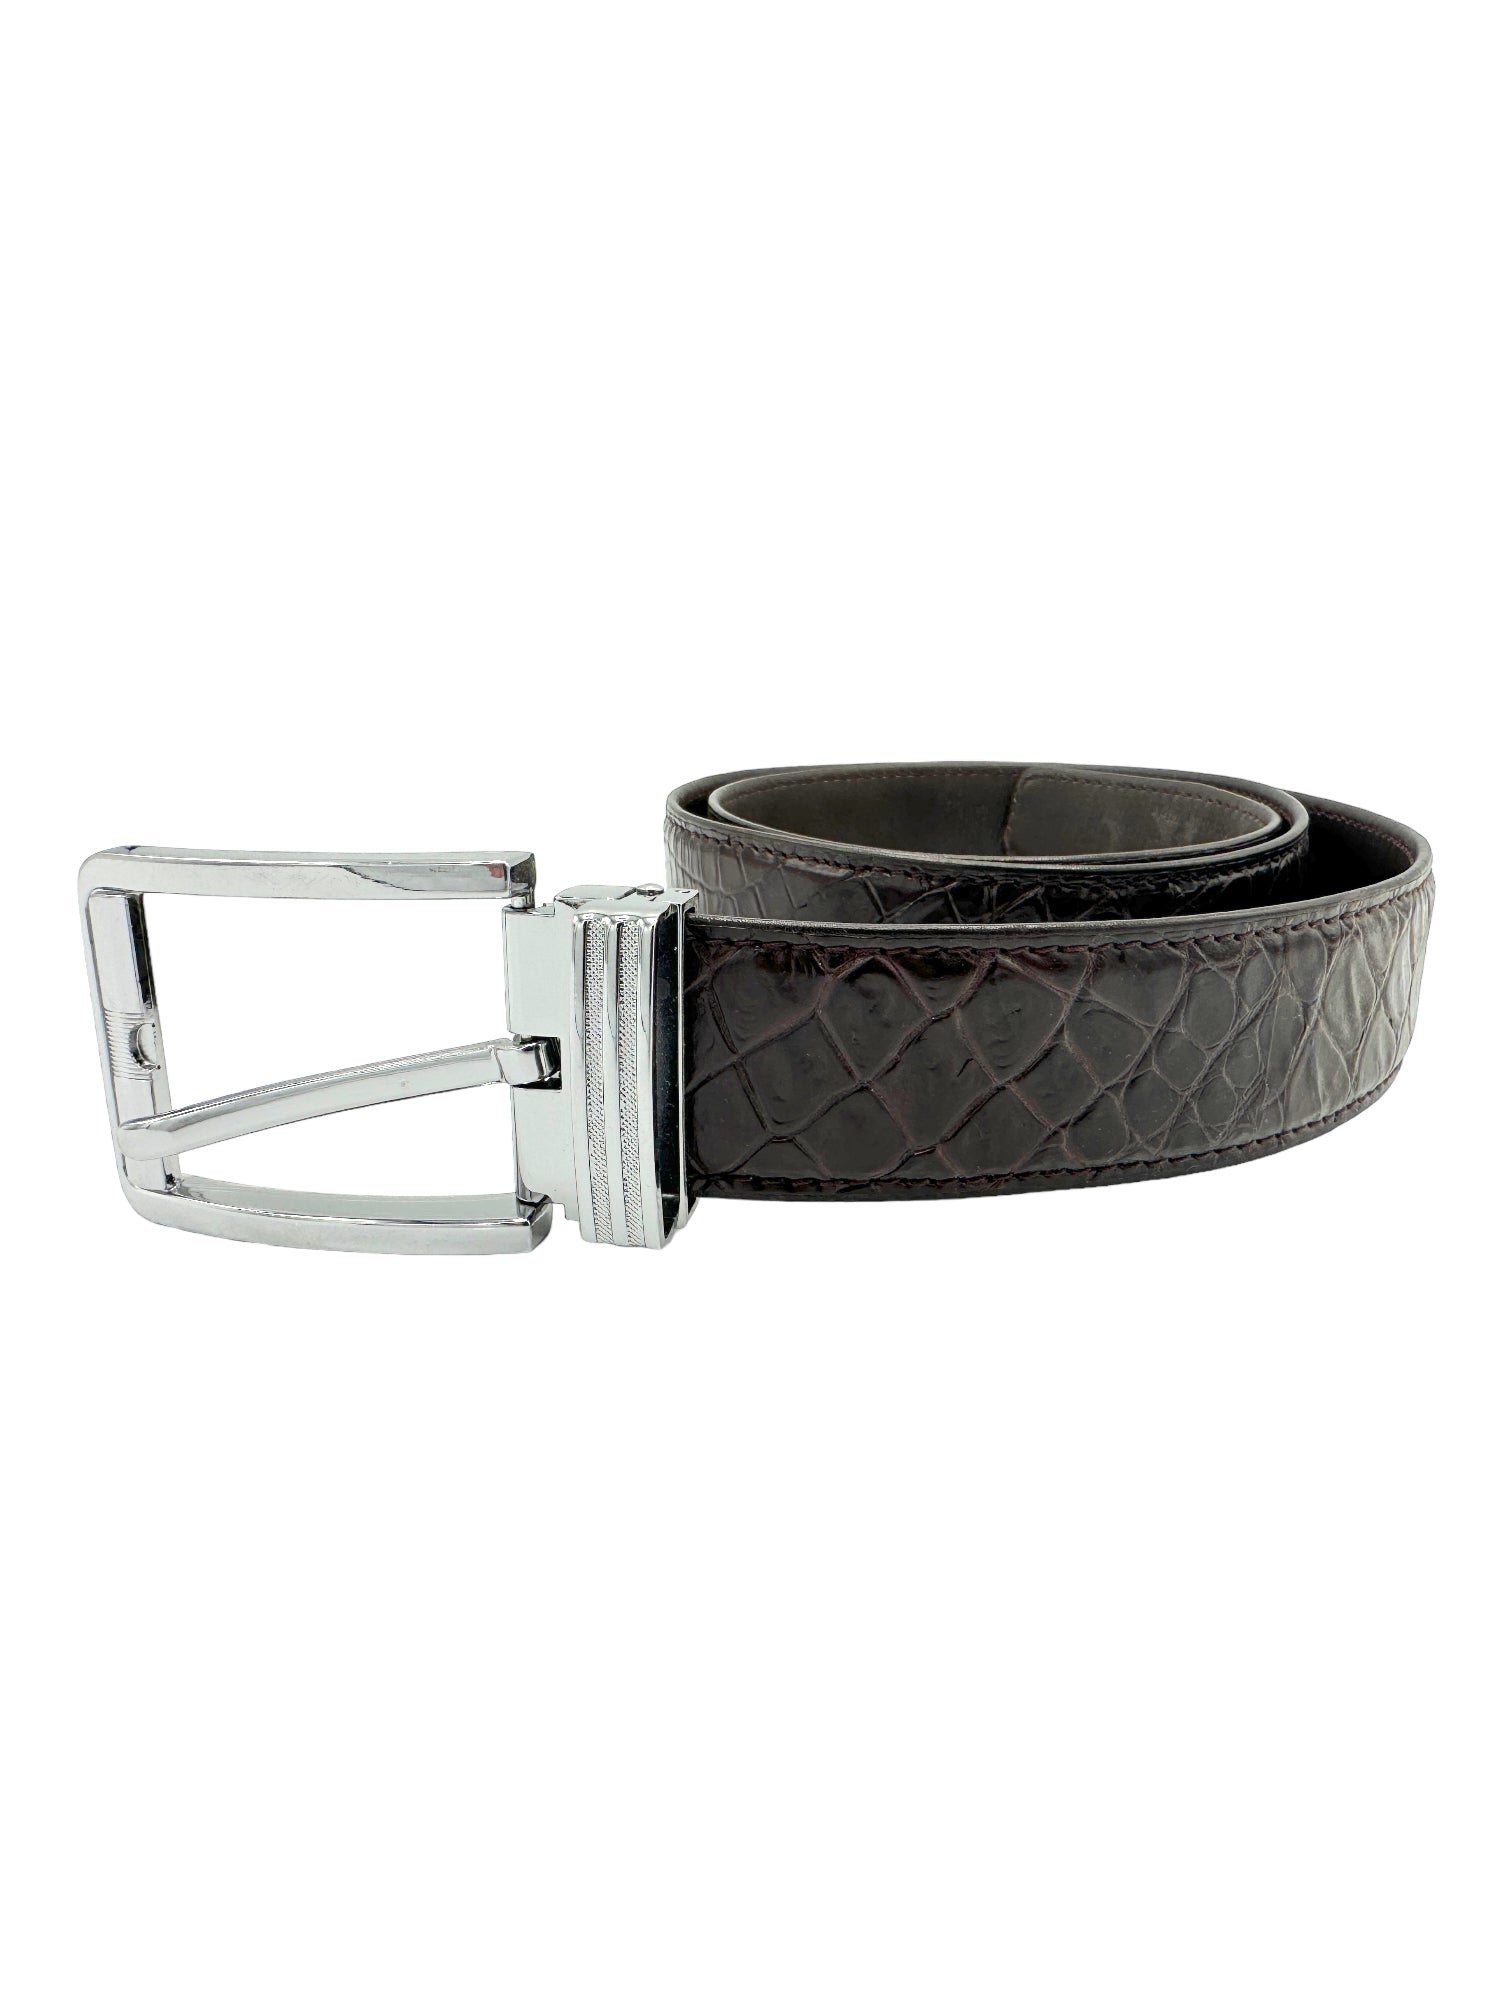 Crocodile Leather Brown Belt Unpunched - Genuine Design luxury consignment Calgary, Alberta, Canada New and pre-owned clothing, shoes, accessories.